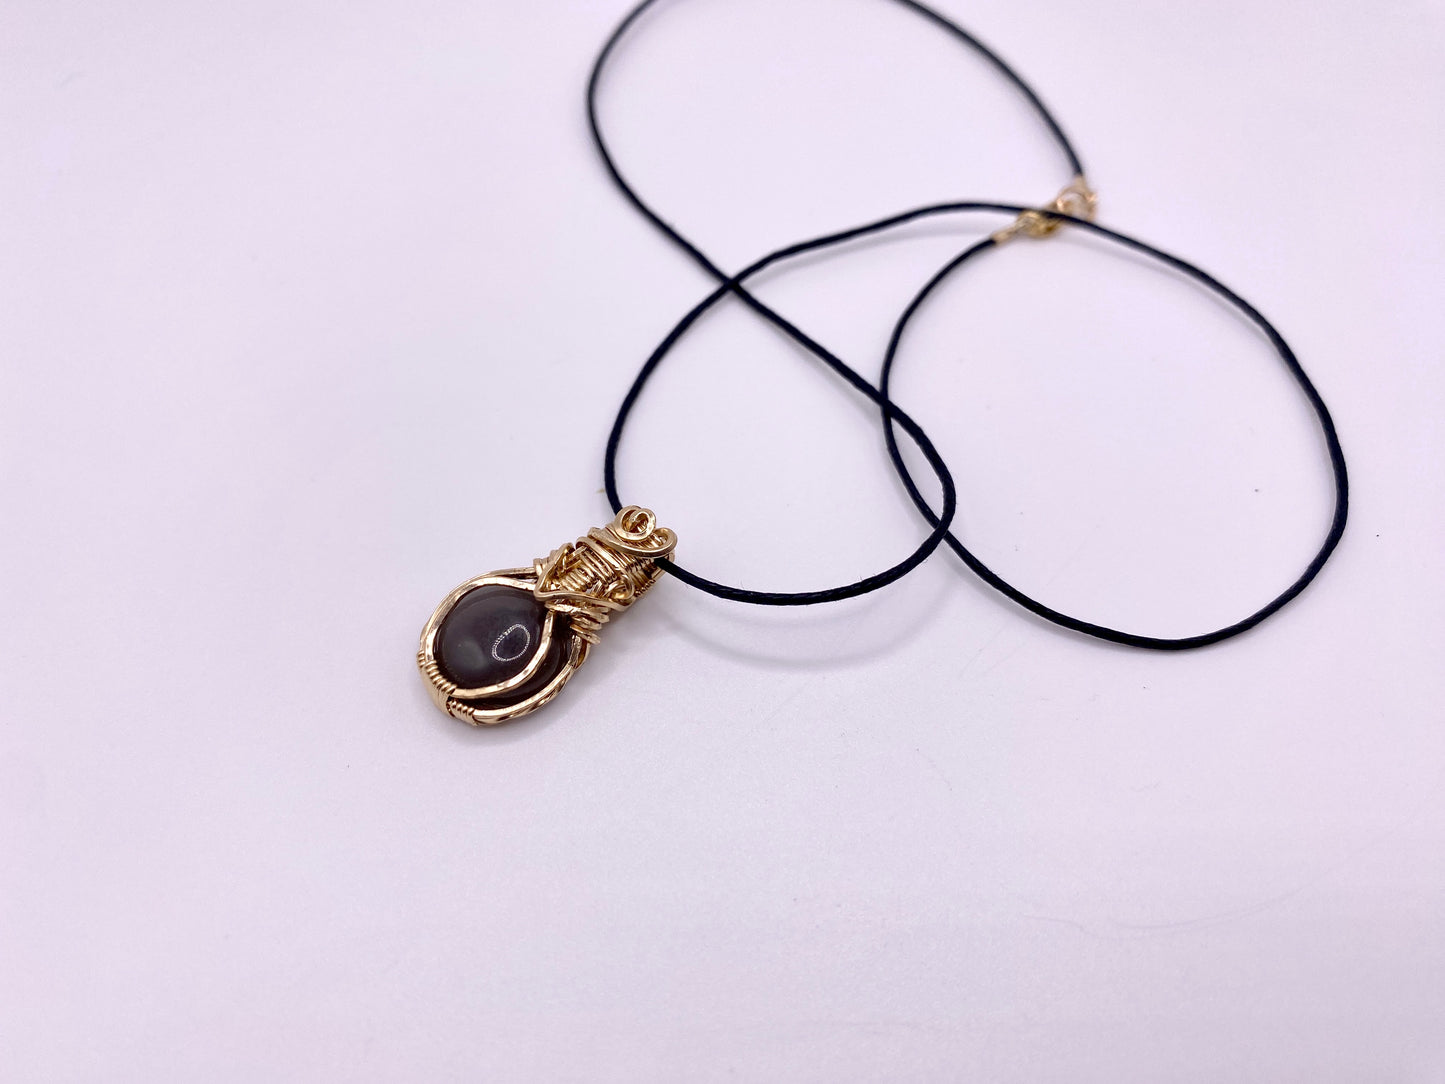 New Moon Wire Wrapped Gray Mini Moonstone Necklace - Original Design in 14K Gold Fill Wire